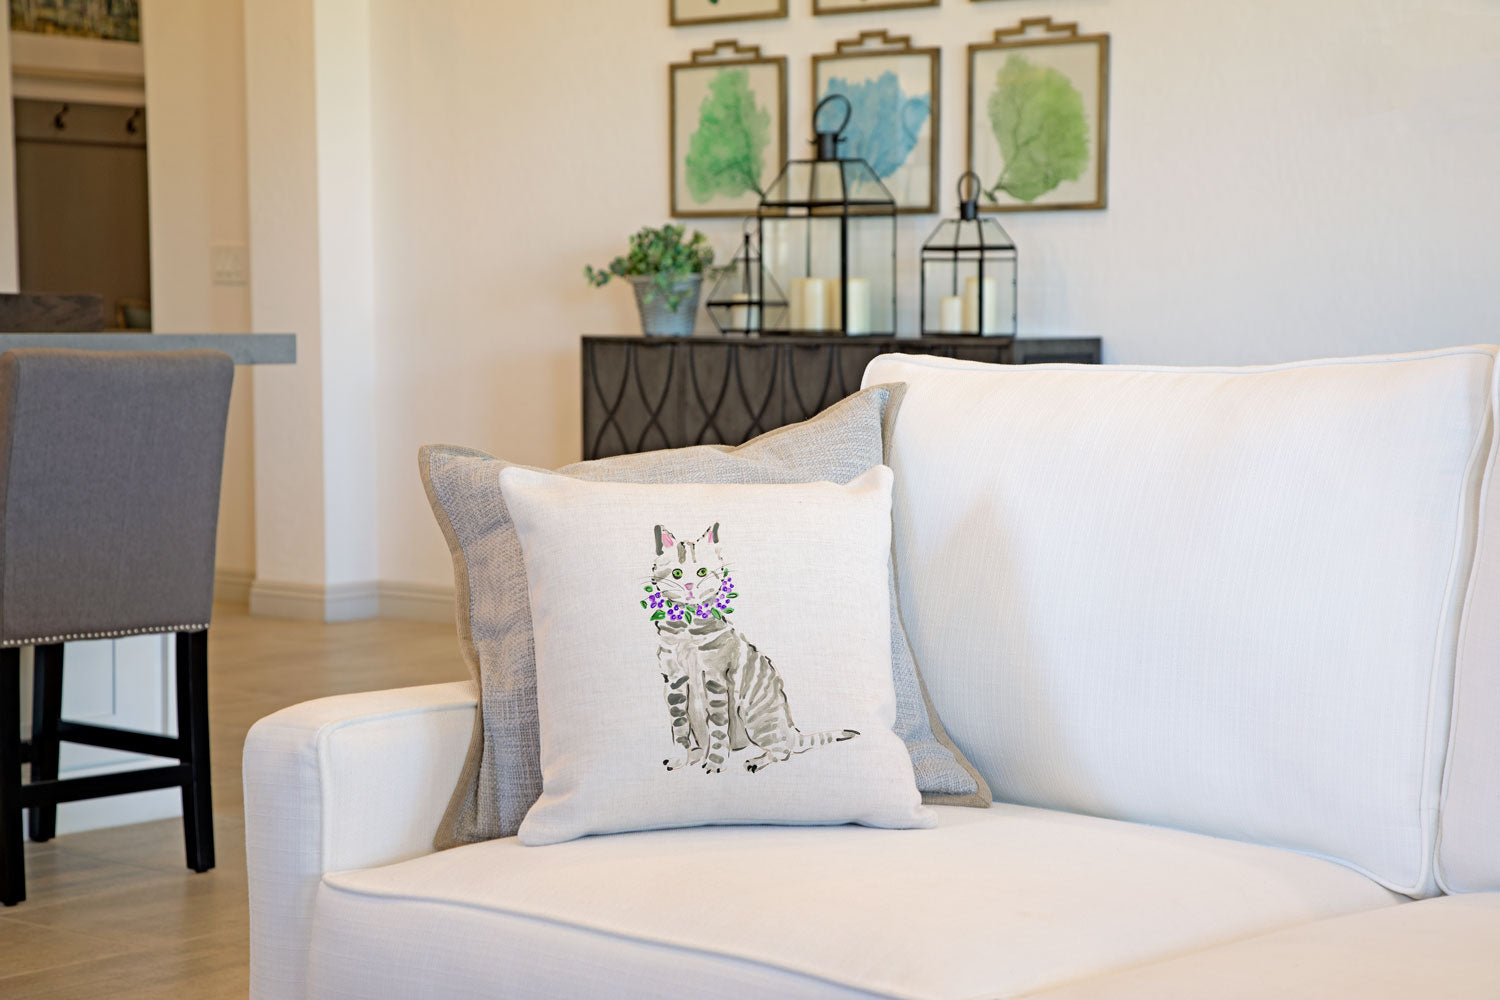 Tabby Cat Throw Pillow Cover - Cat Illustration Throw Pillow Cover Collection-Di Lewis